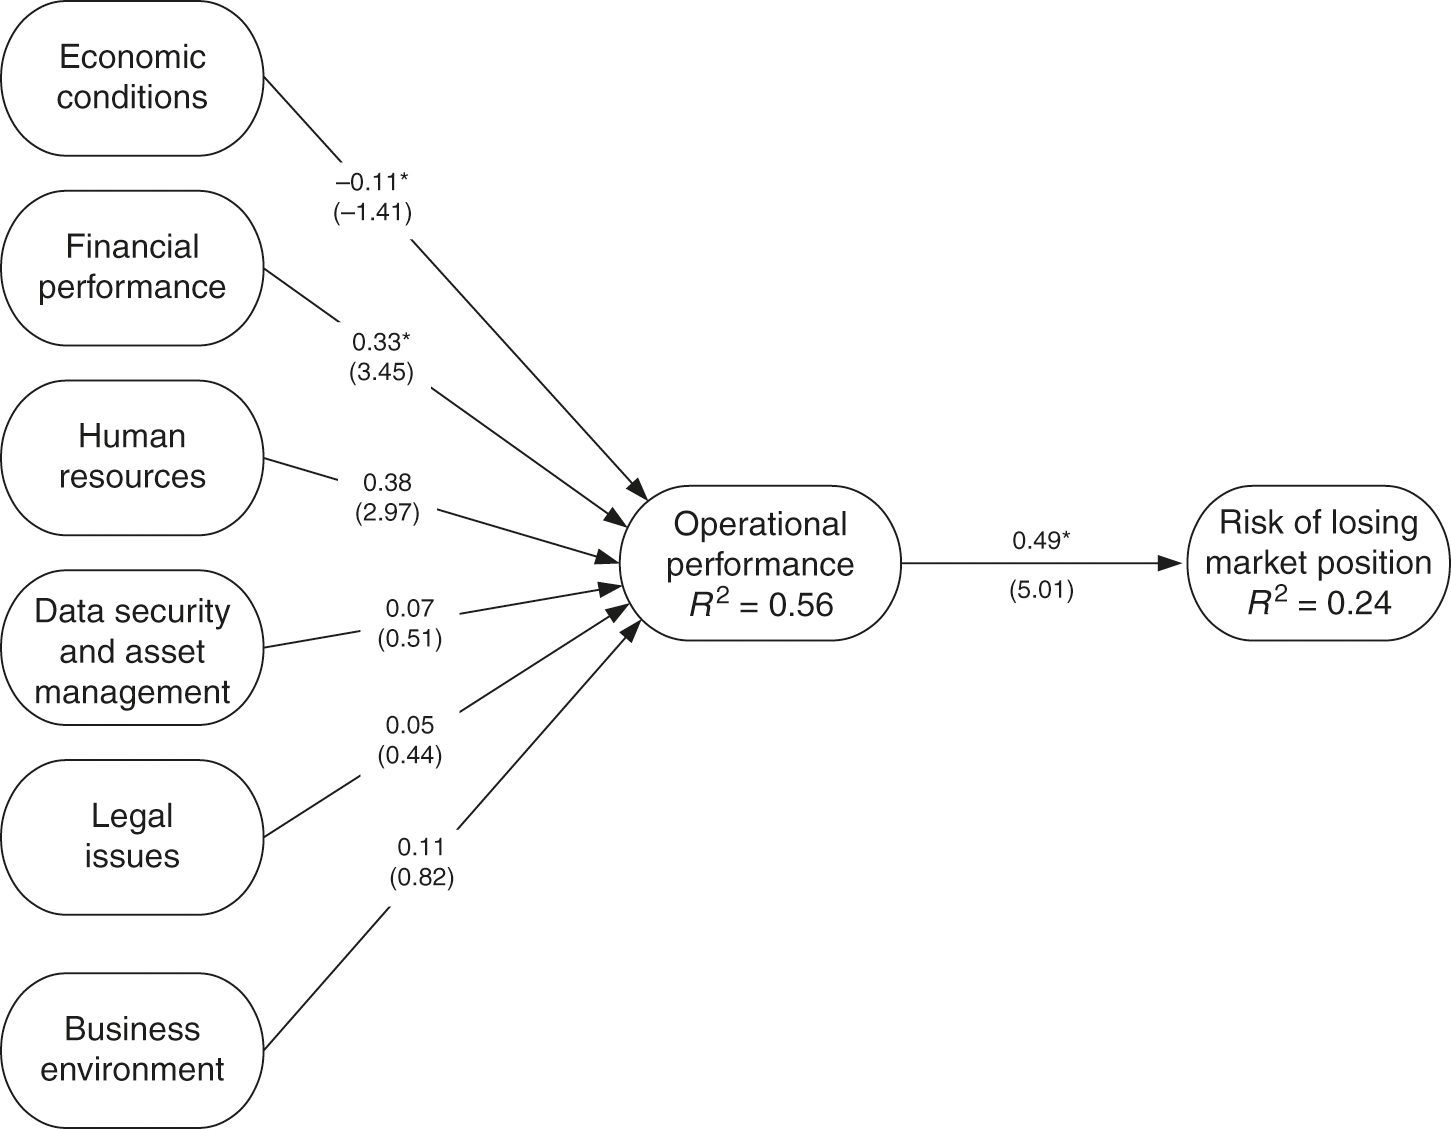 A structural model for examining the impact of various sources of business risk on operational performance and the risk of Serbian companies losing their market position.